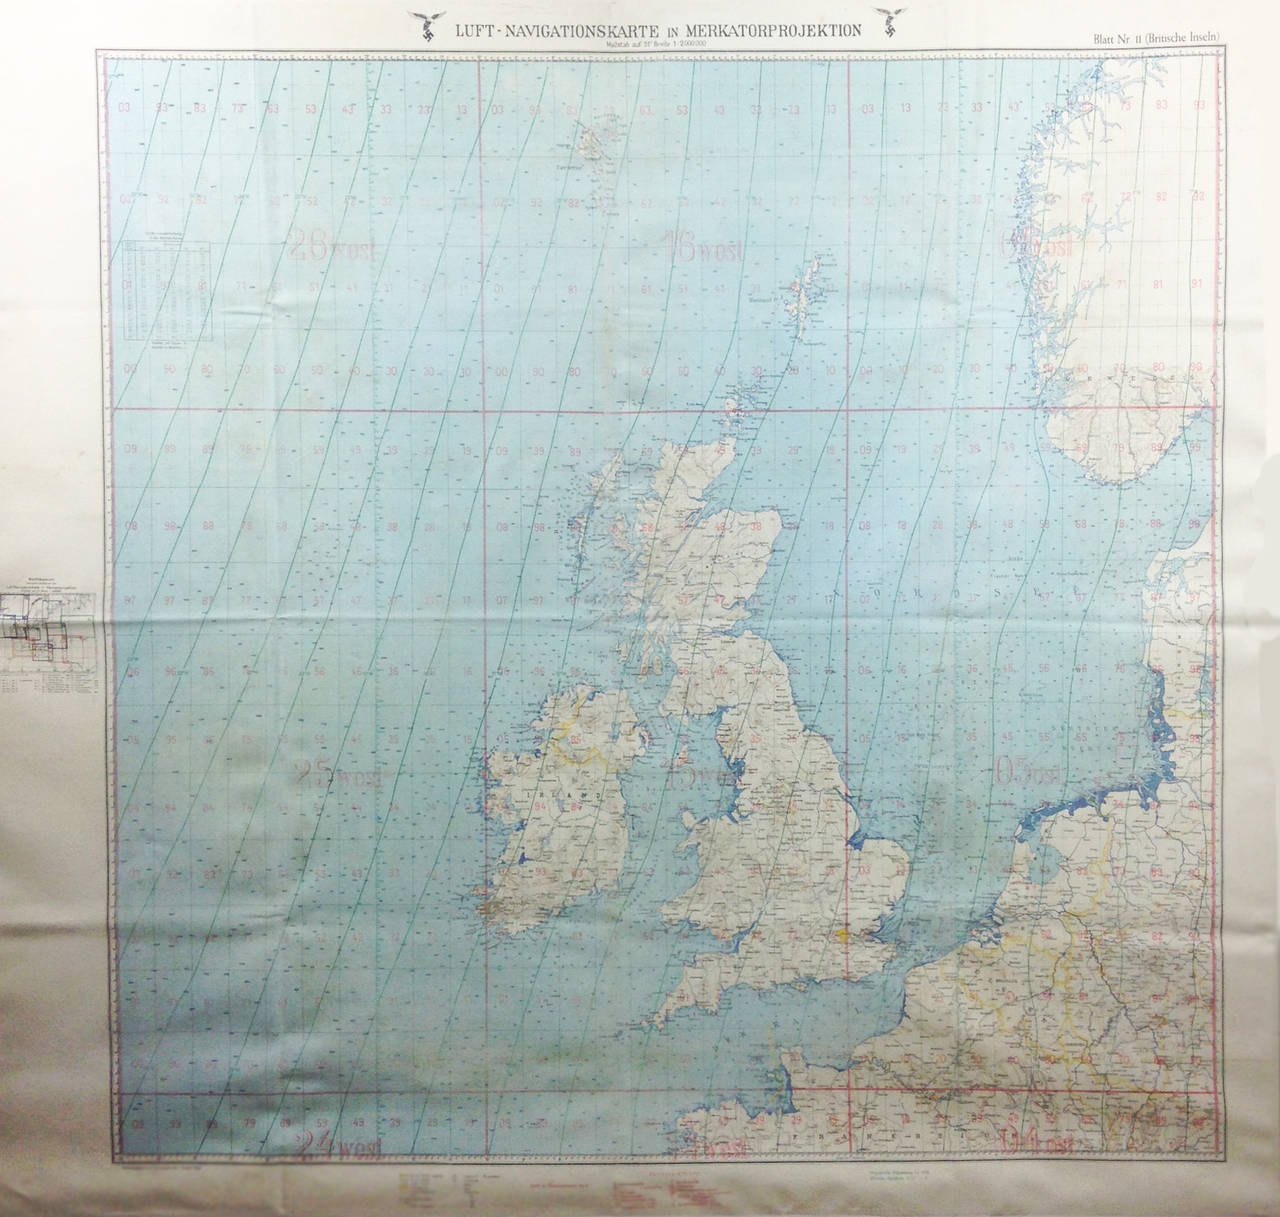 A very rare and poignant WWII era map of the United Kingdom produced by Germany for the Luftwaffe.

The map is printed on an unusual rubberized material, undoubtedly to prevent damp, degradation or damage during flight. It's in very fine condition